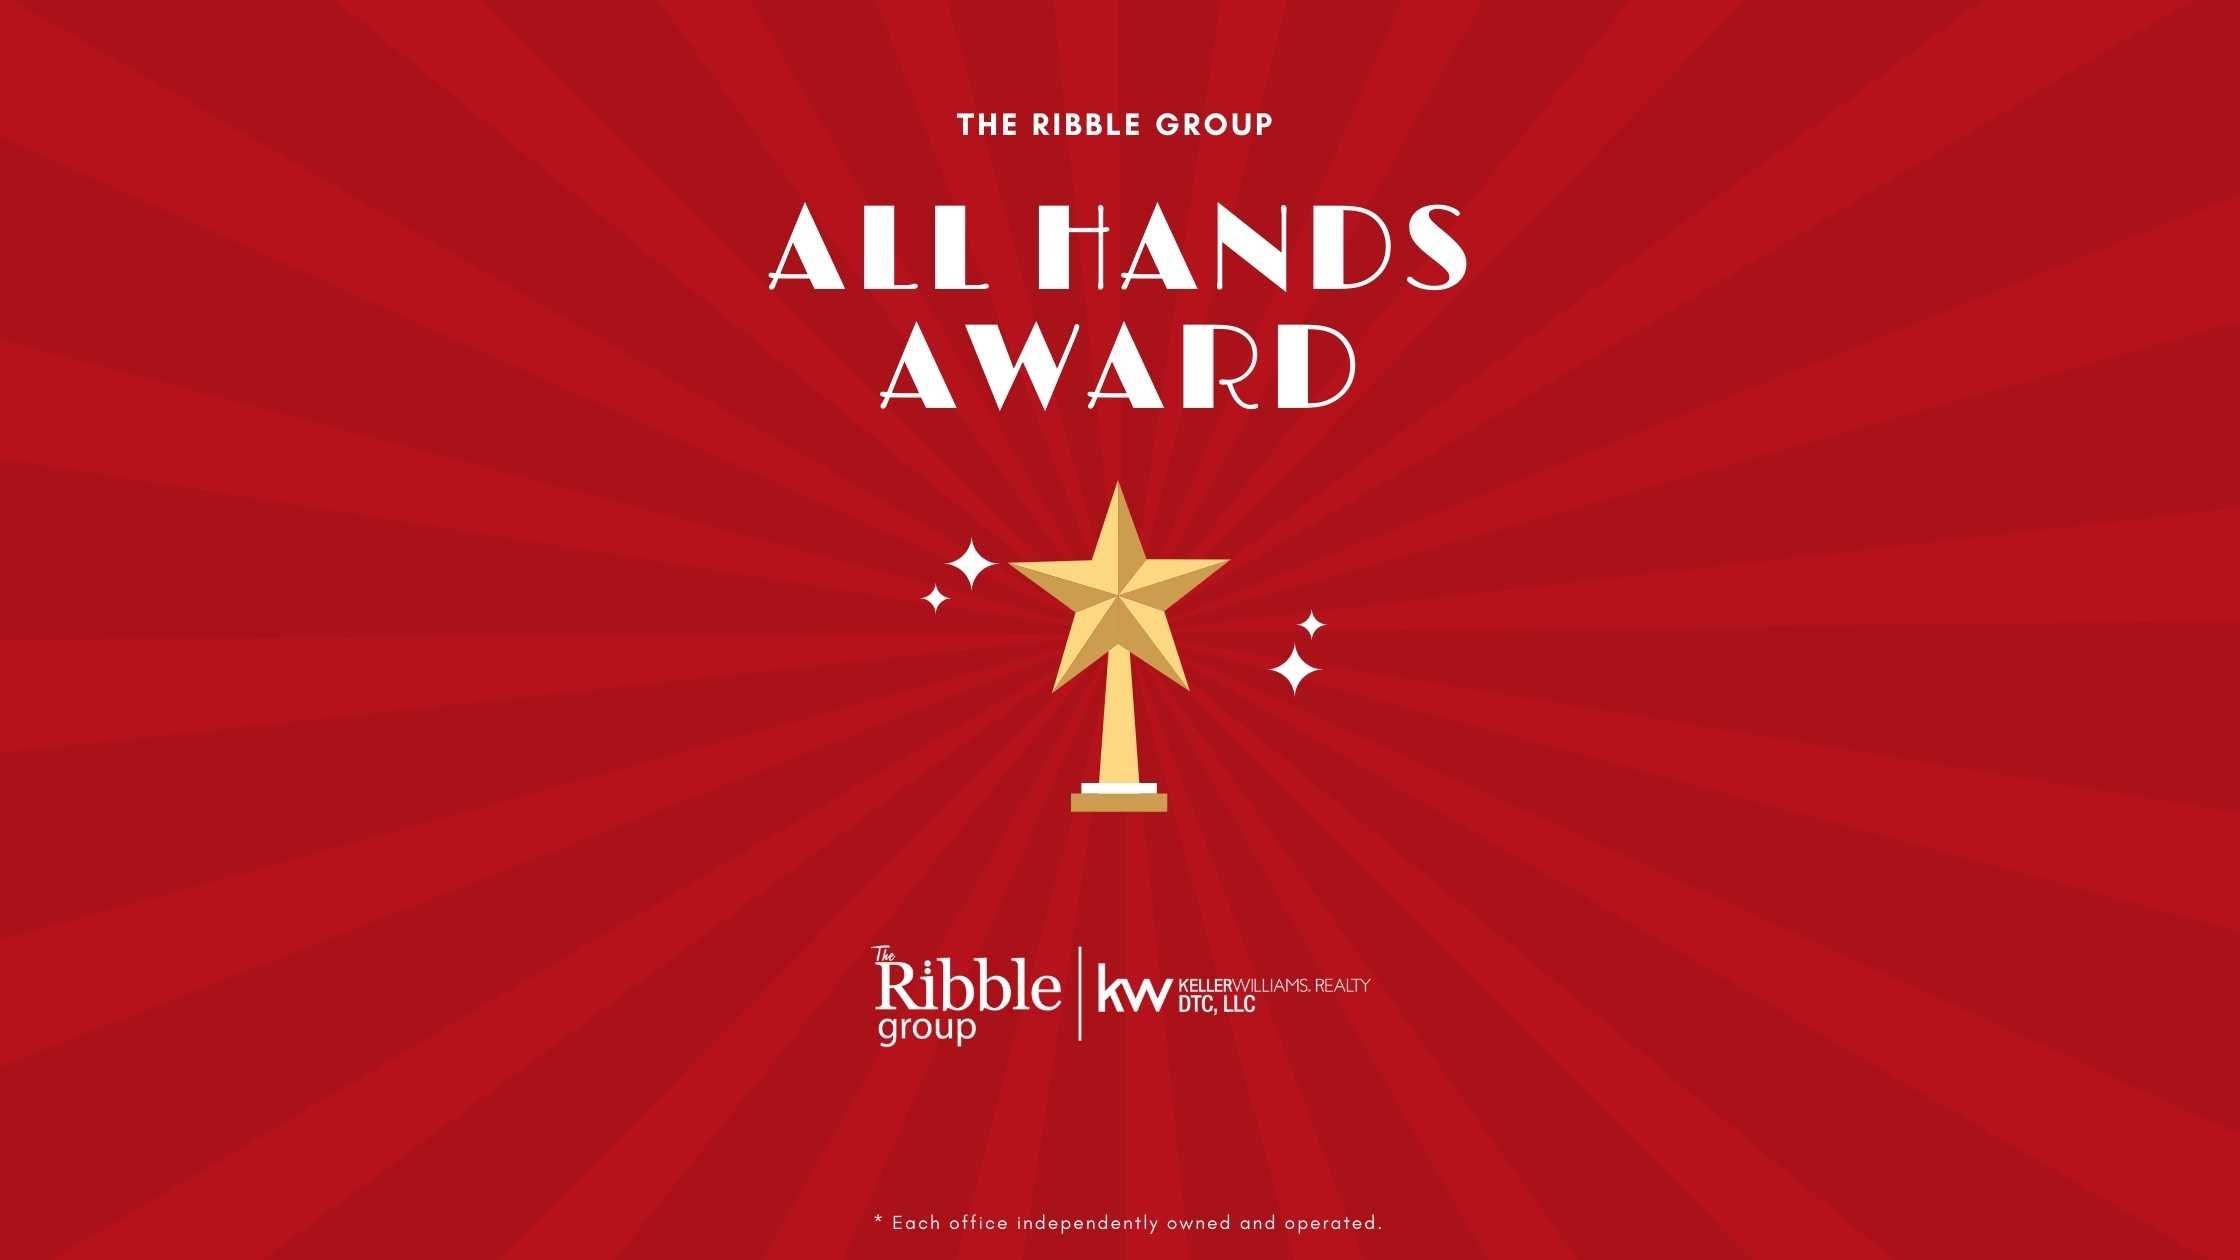 Congrats to The Ribble Group Winners Who Won Big In Our Last 12-Week Year of 2021!